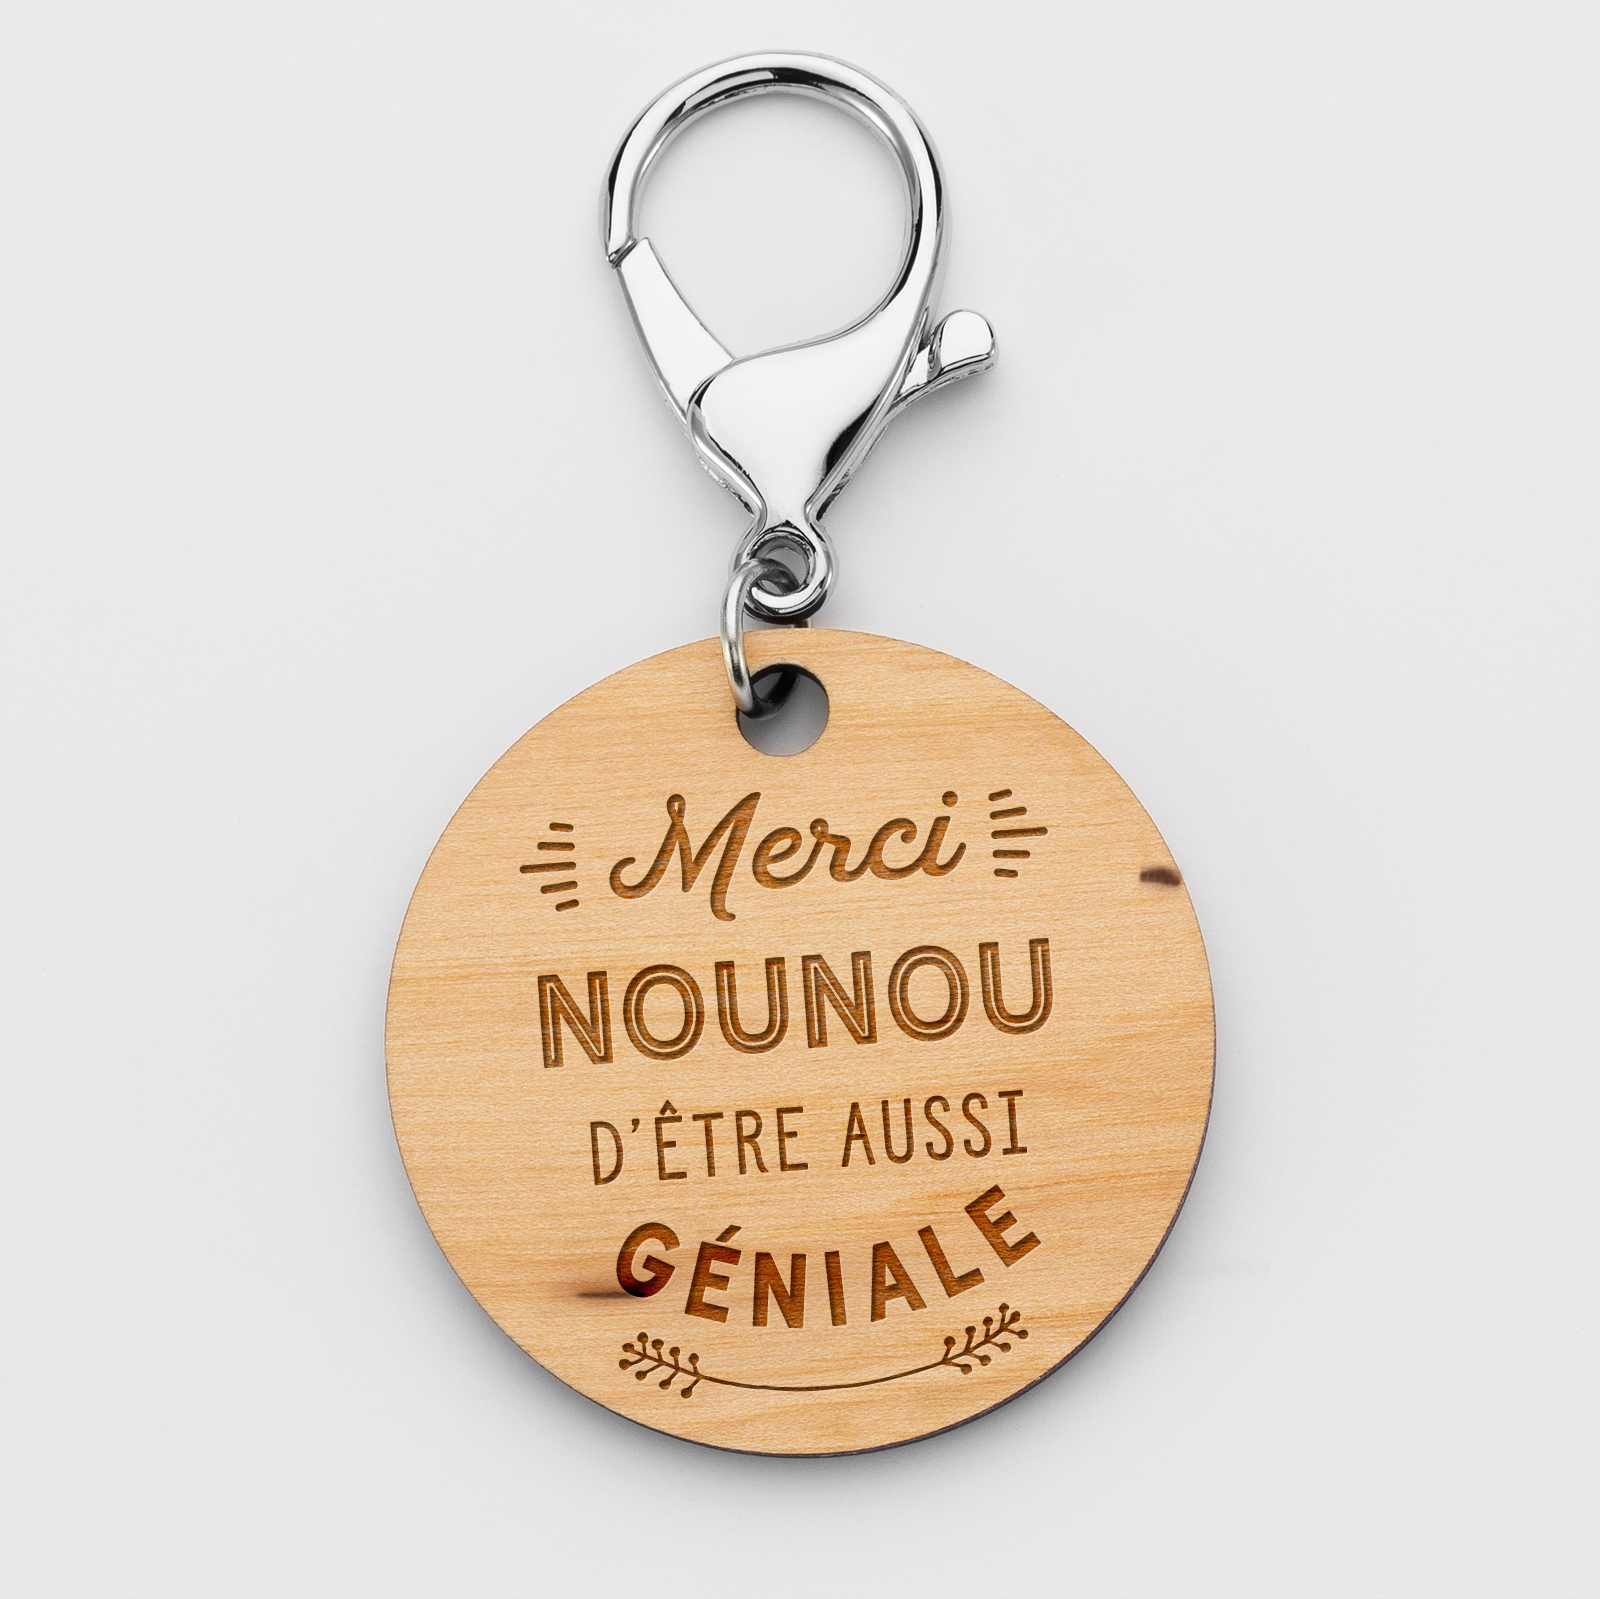 Personalised engraved round wooden medallion keyring 50mm "Our swall imperfection"- special edition "Merci Nounou"